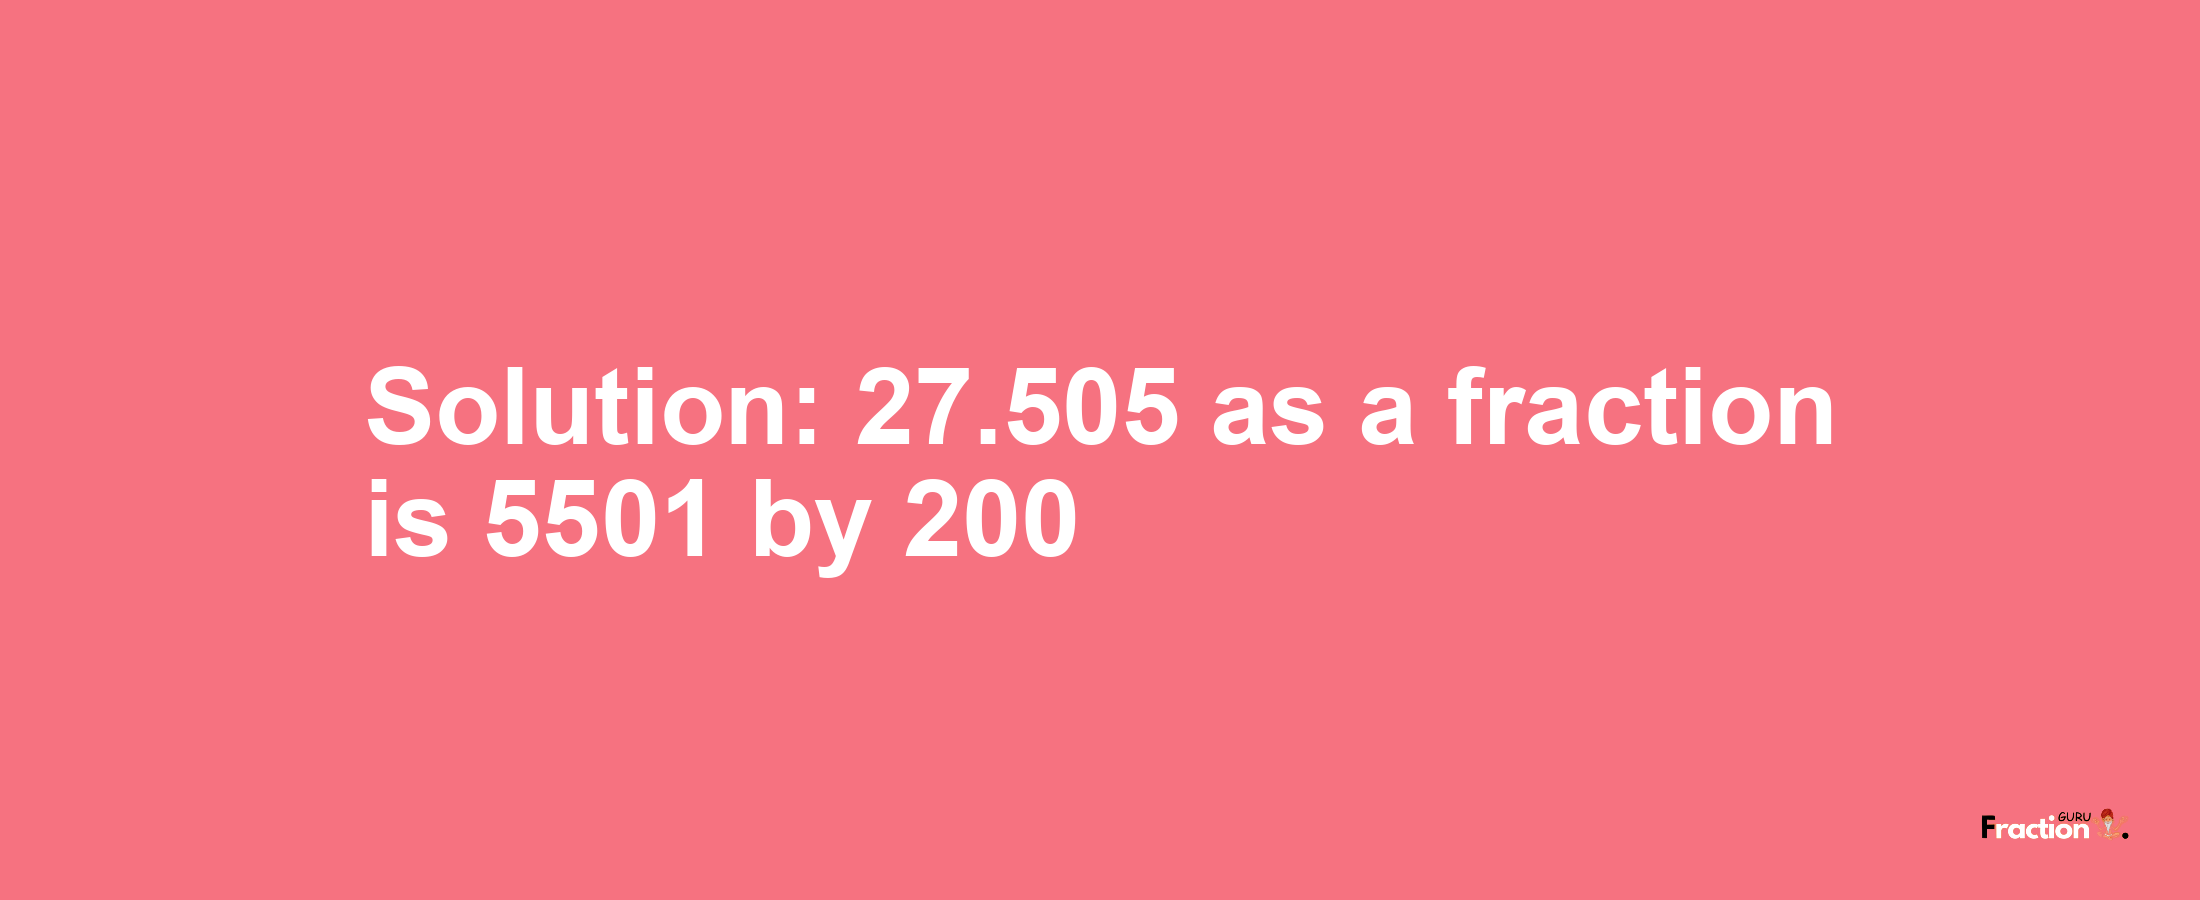 Solution:27.505 as a fraction is 5501/200